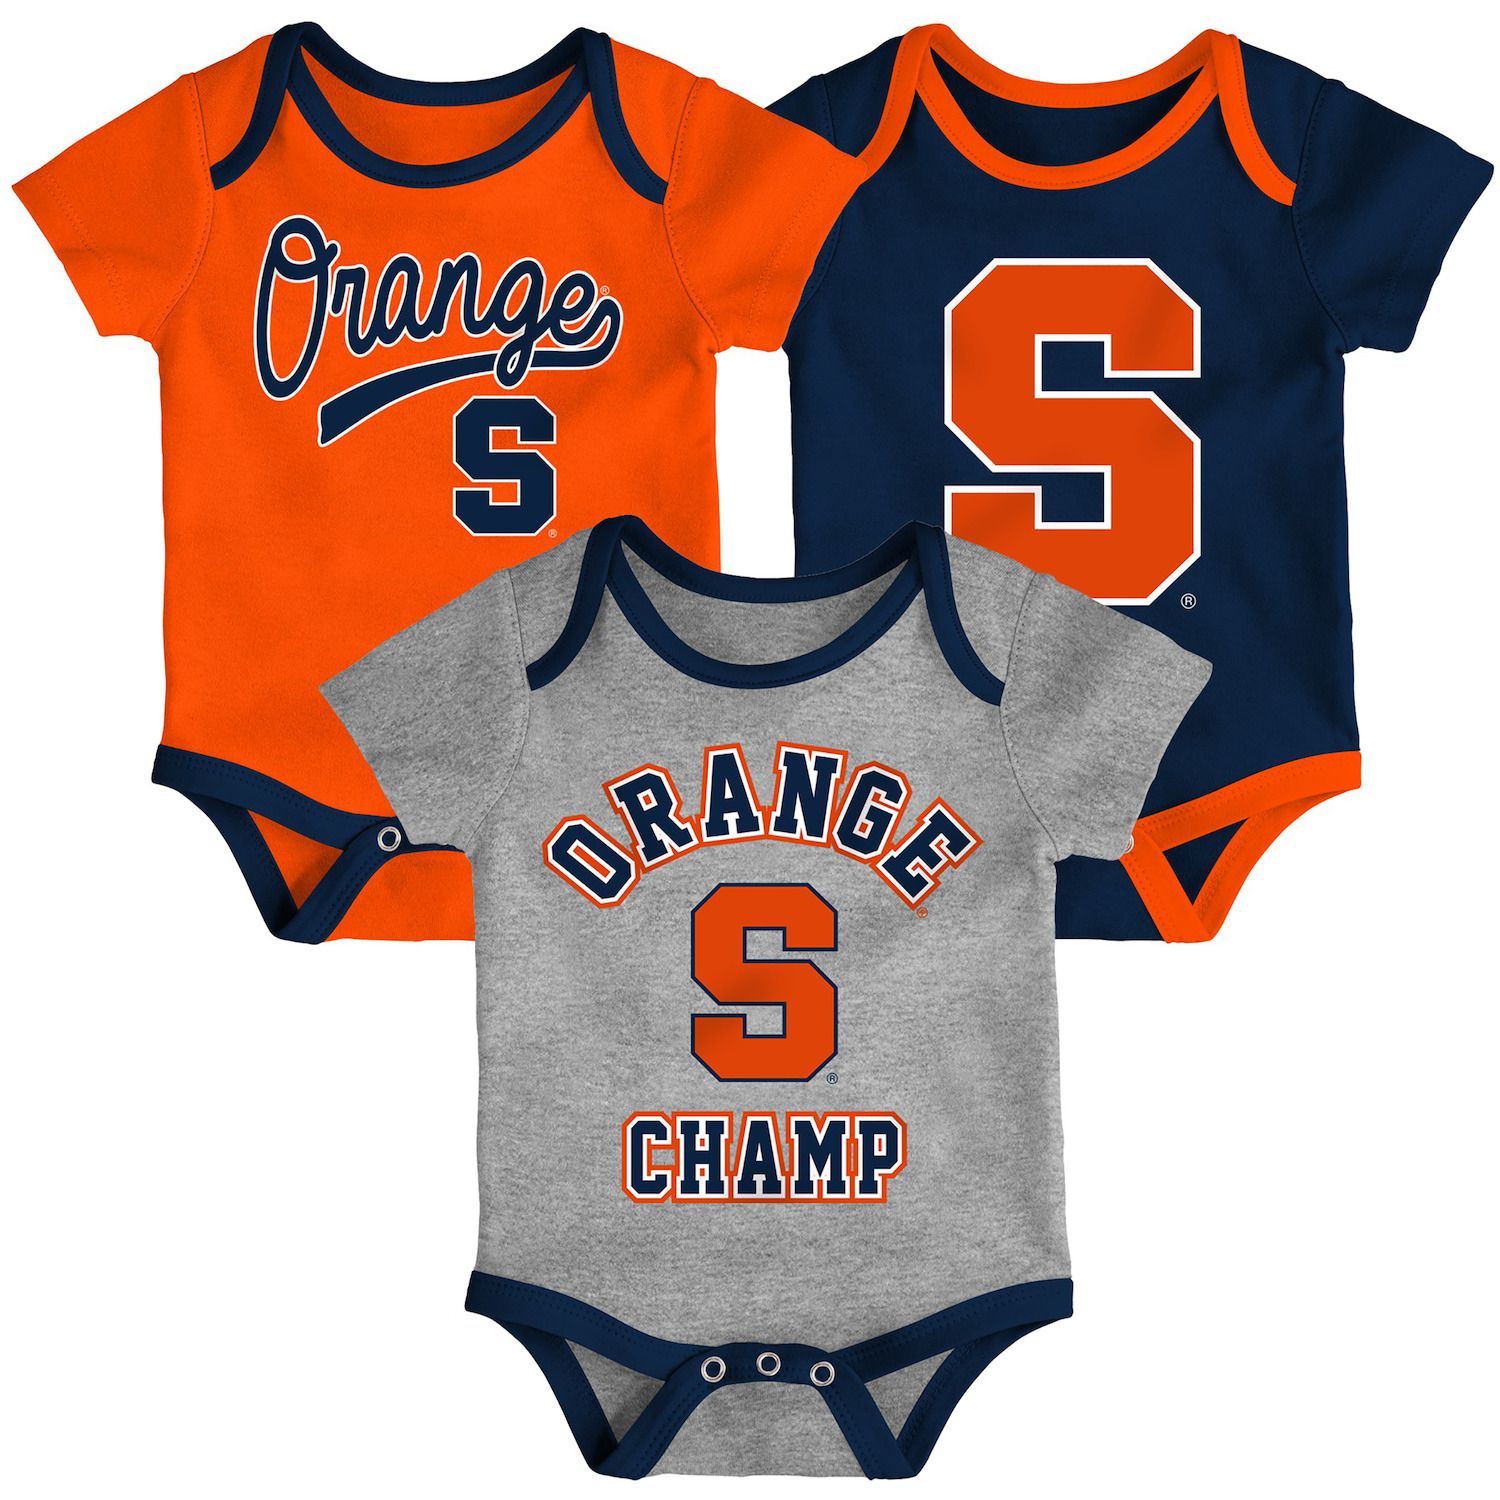 champs baby boy clothes